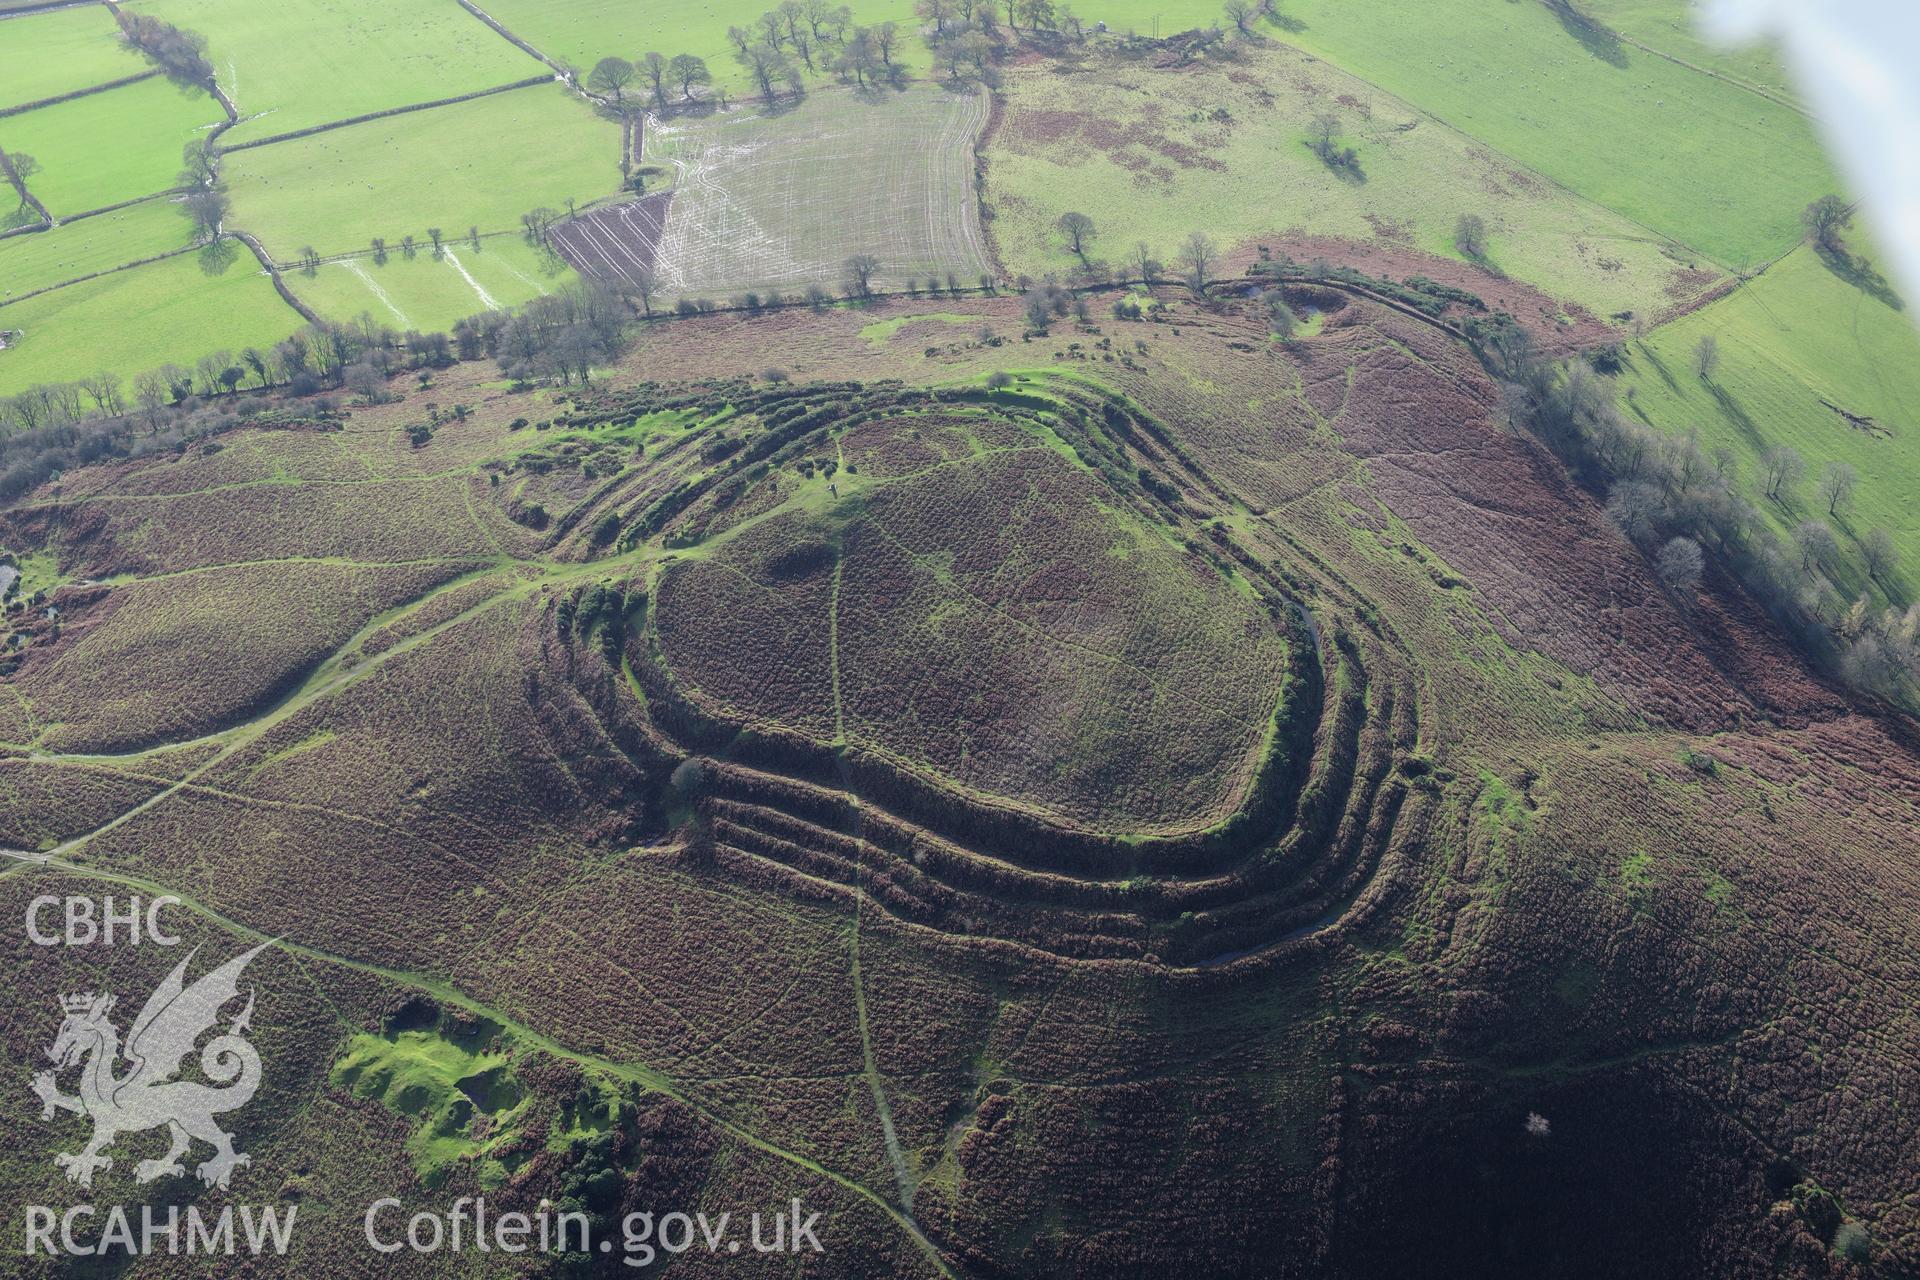 RCAHMW colour oblique photograph of Pen y Crug hillfort, in winter sun. Taken by Toby Driver on 23/11/2012.